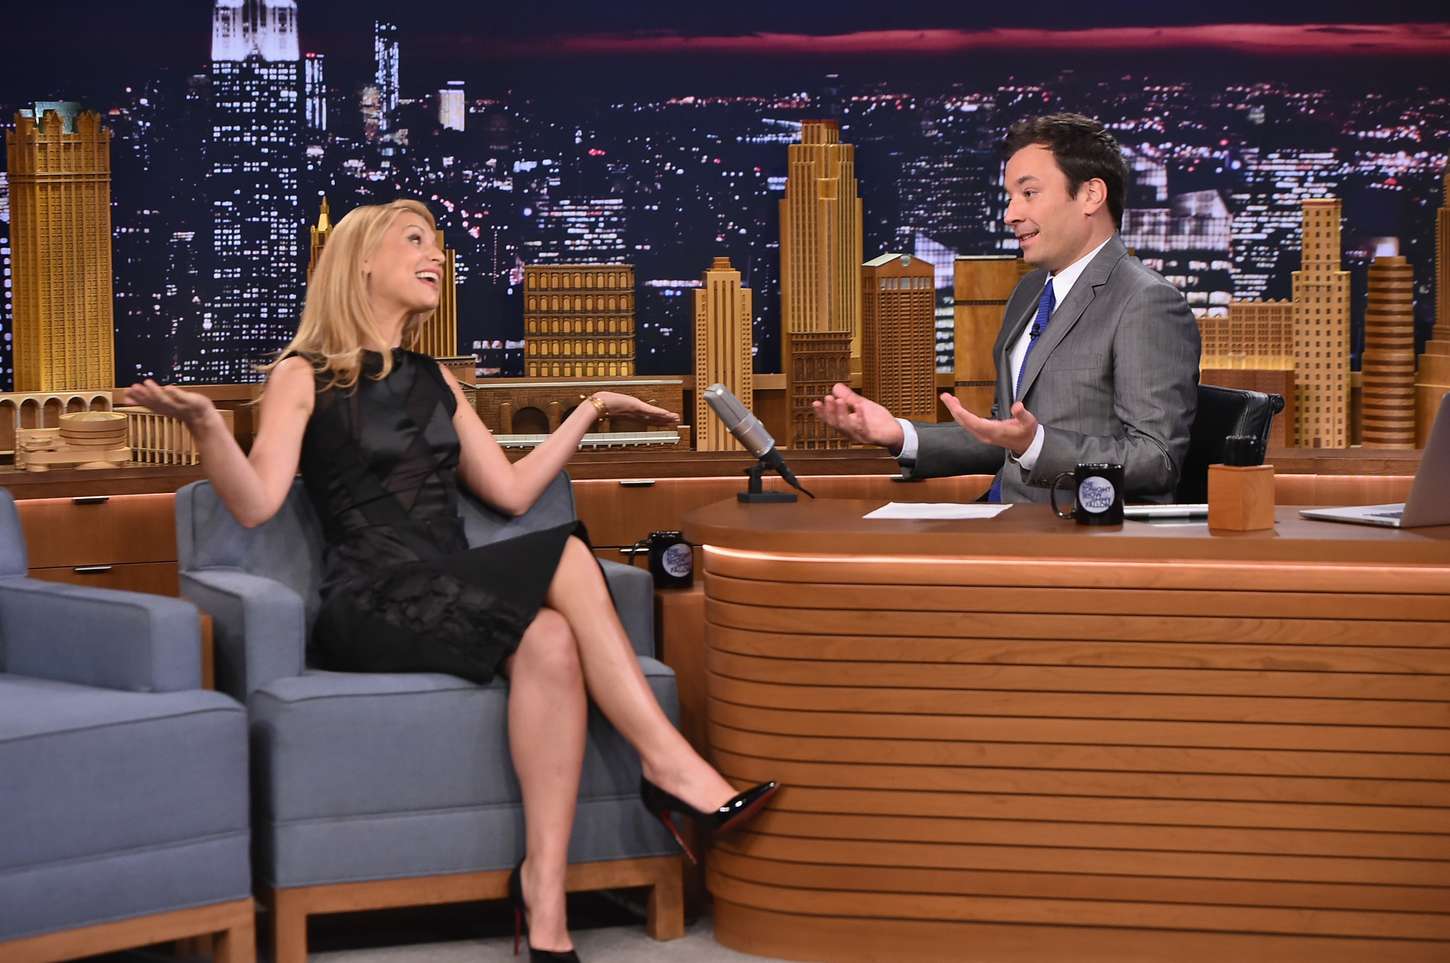 Claire Danes 2014 : Claire Danes on The Tonight Show Starring Jimmy Fallon -01